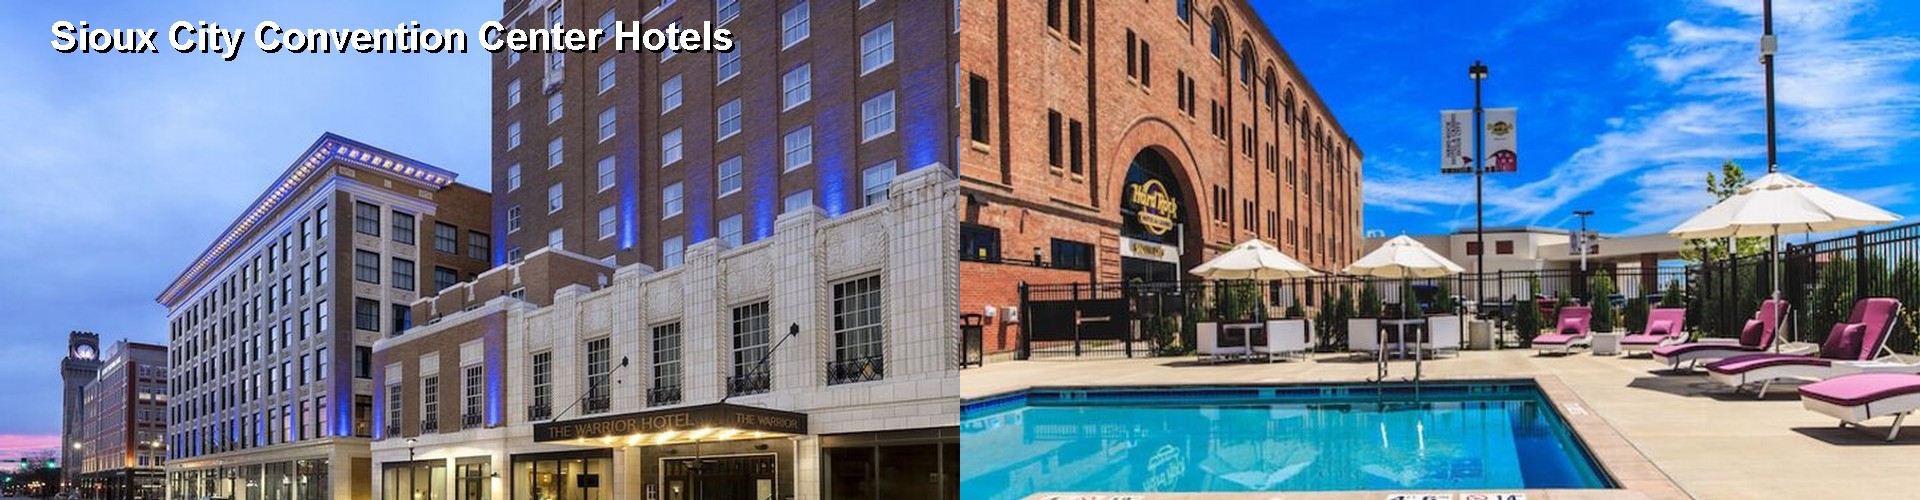 5 Best Hotels near Sioux City Convention Center